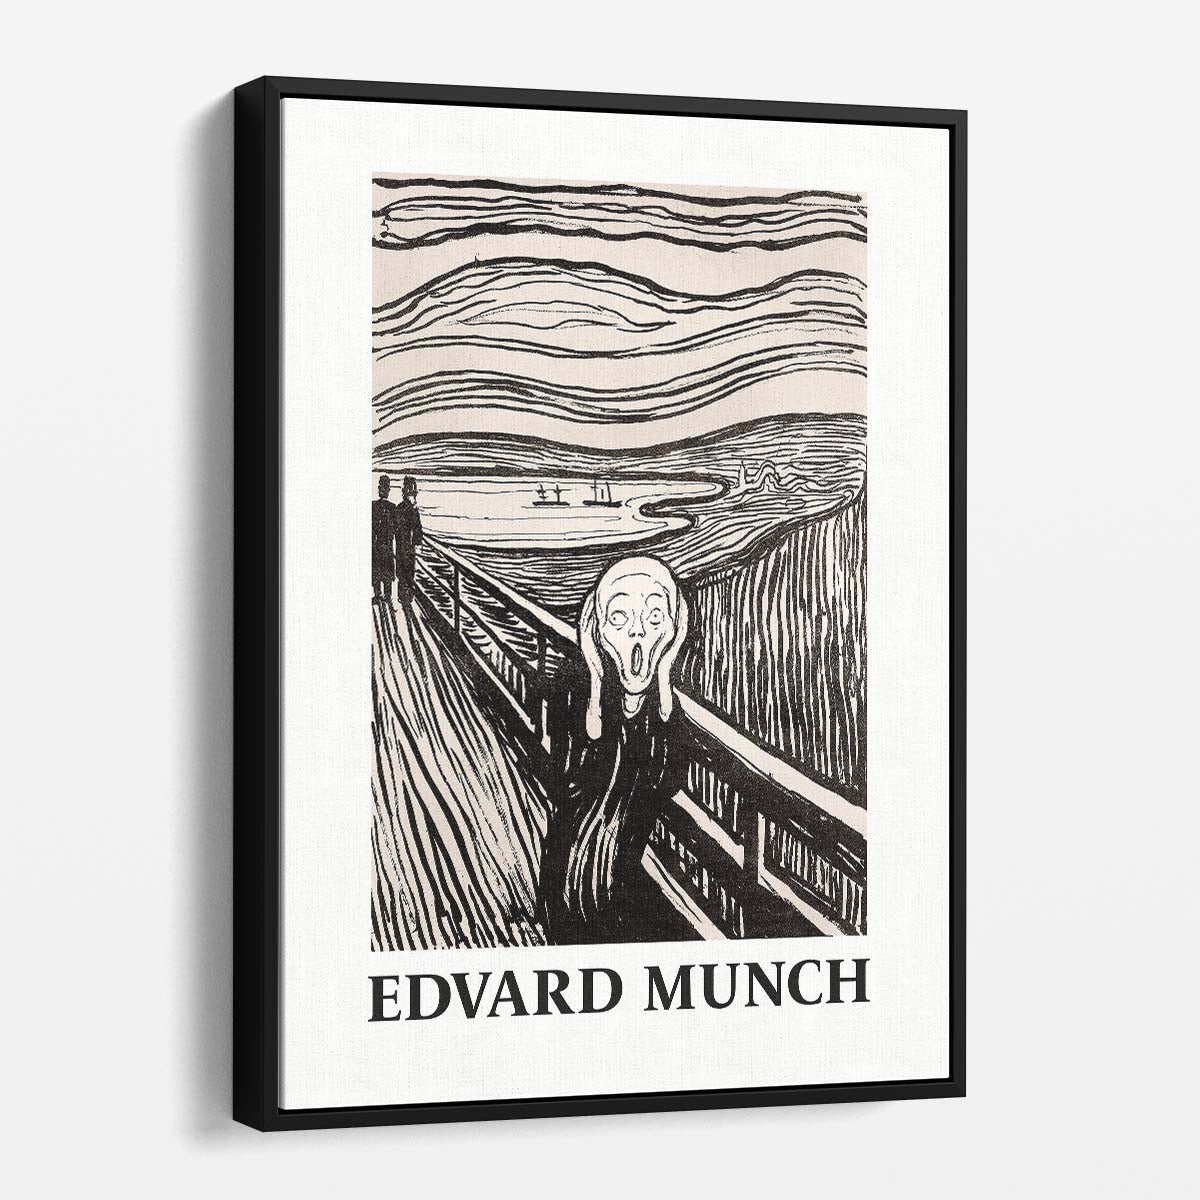 Edvard Munch Masterpiece The Scream Monochrome Acrylic Painting Poster by Luxuriance Designs, made in USA